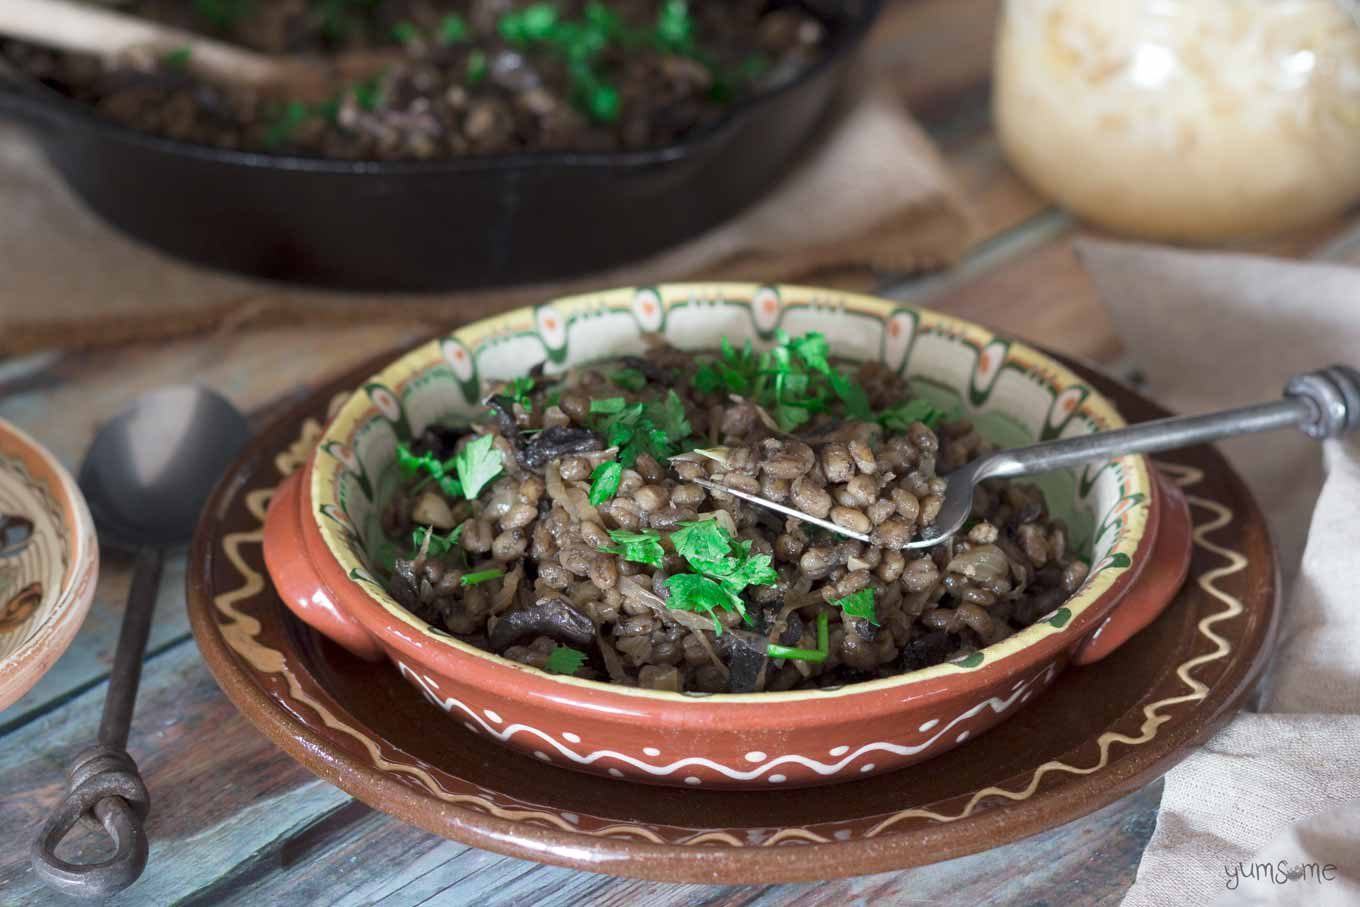 Czech mushroom and barley risotto in a rustic bowl with a rustic fork.